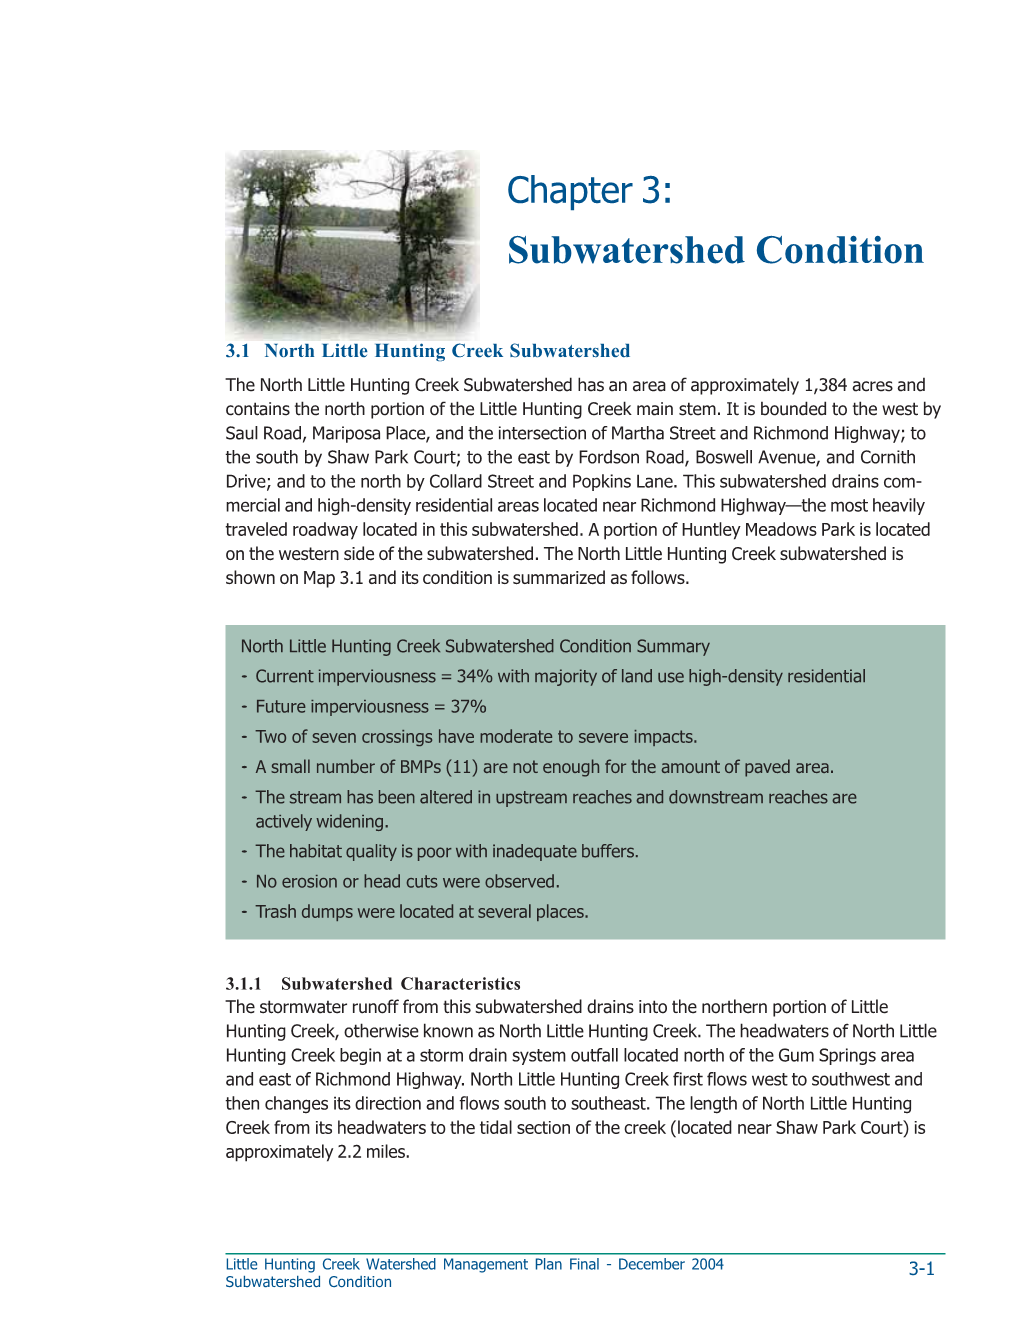 Little Hunting Creek Watershed Management Plan Chapter 3